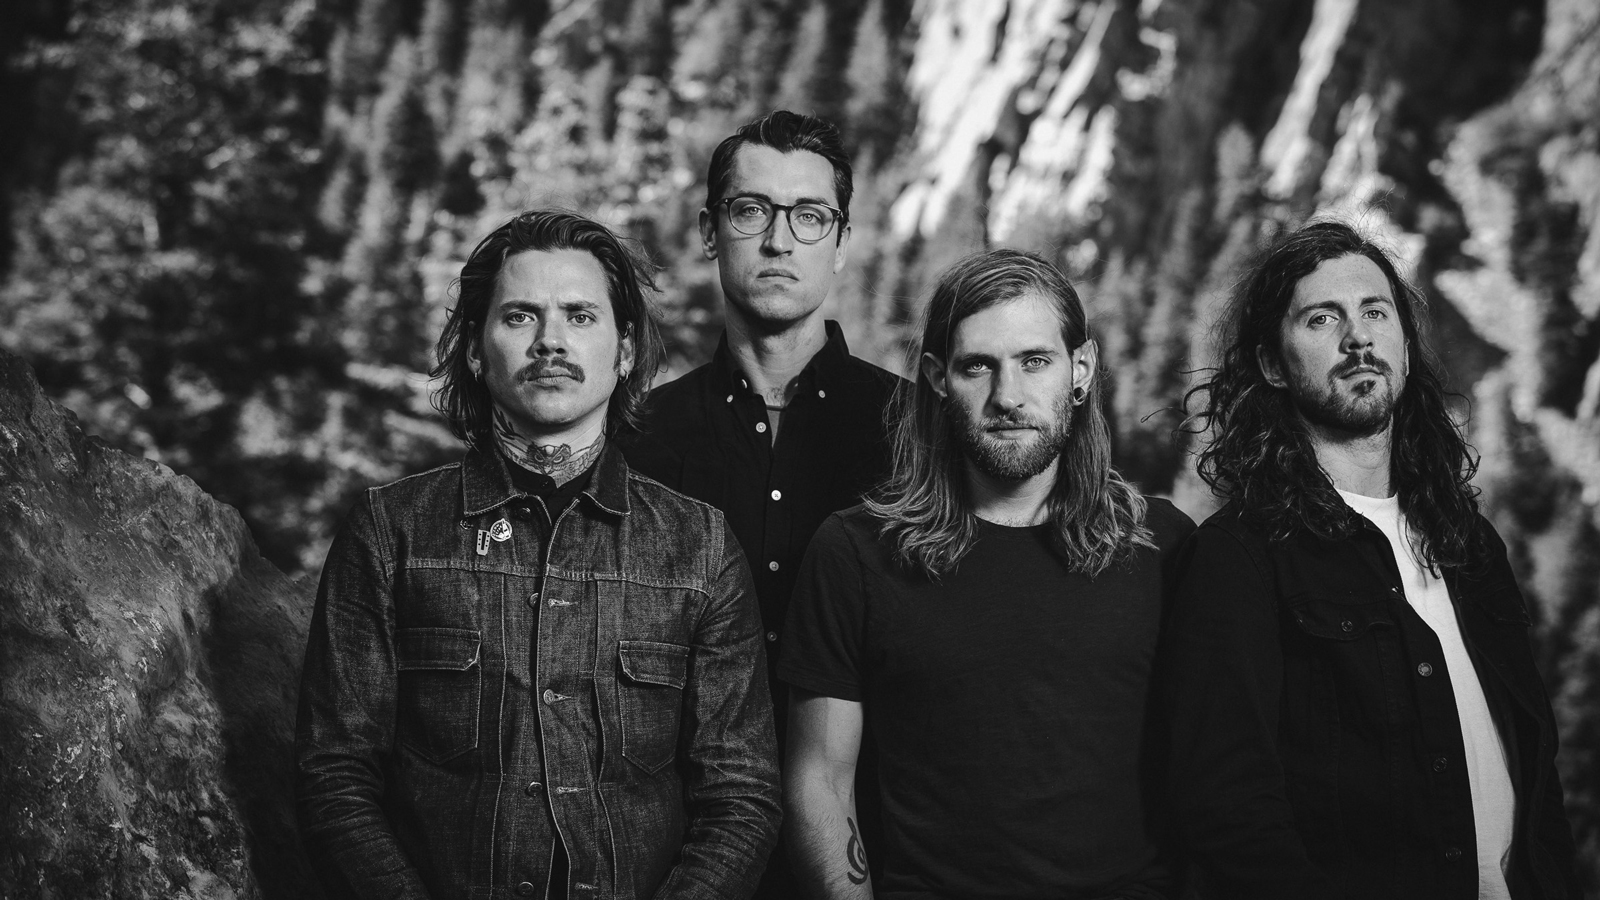 The Devil Wears Prada announce European tour dates in fall 2022 supporting  Wage War - Chaoszine